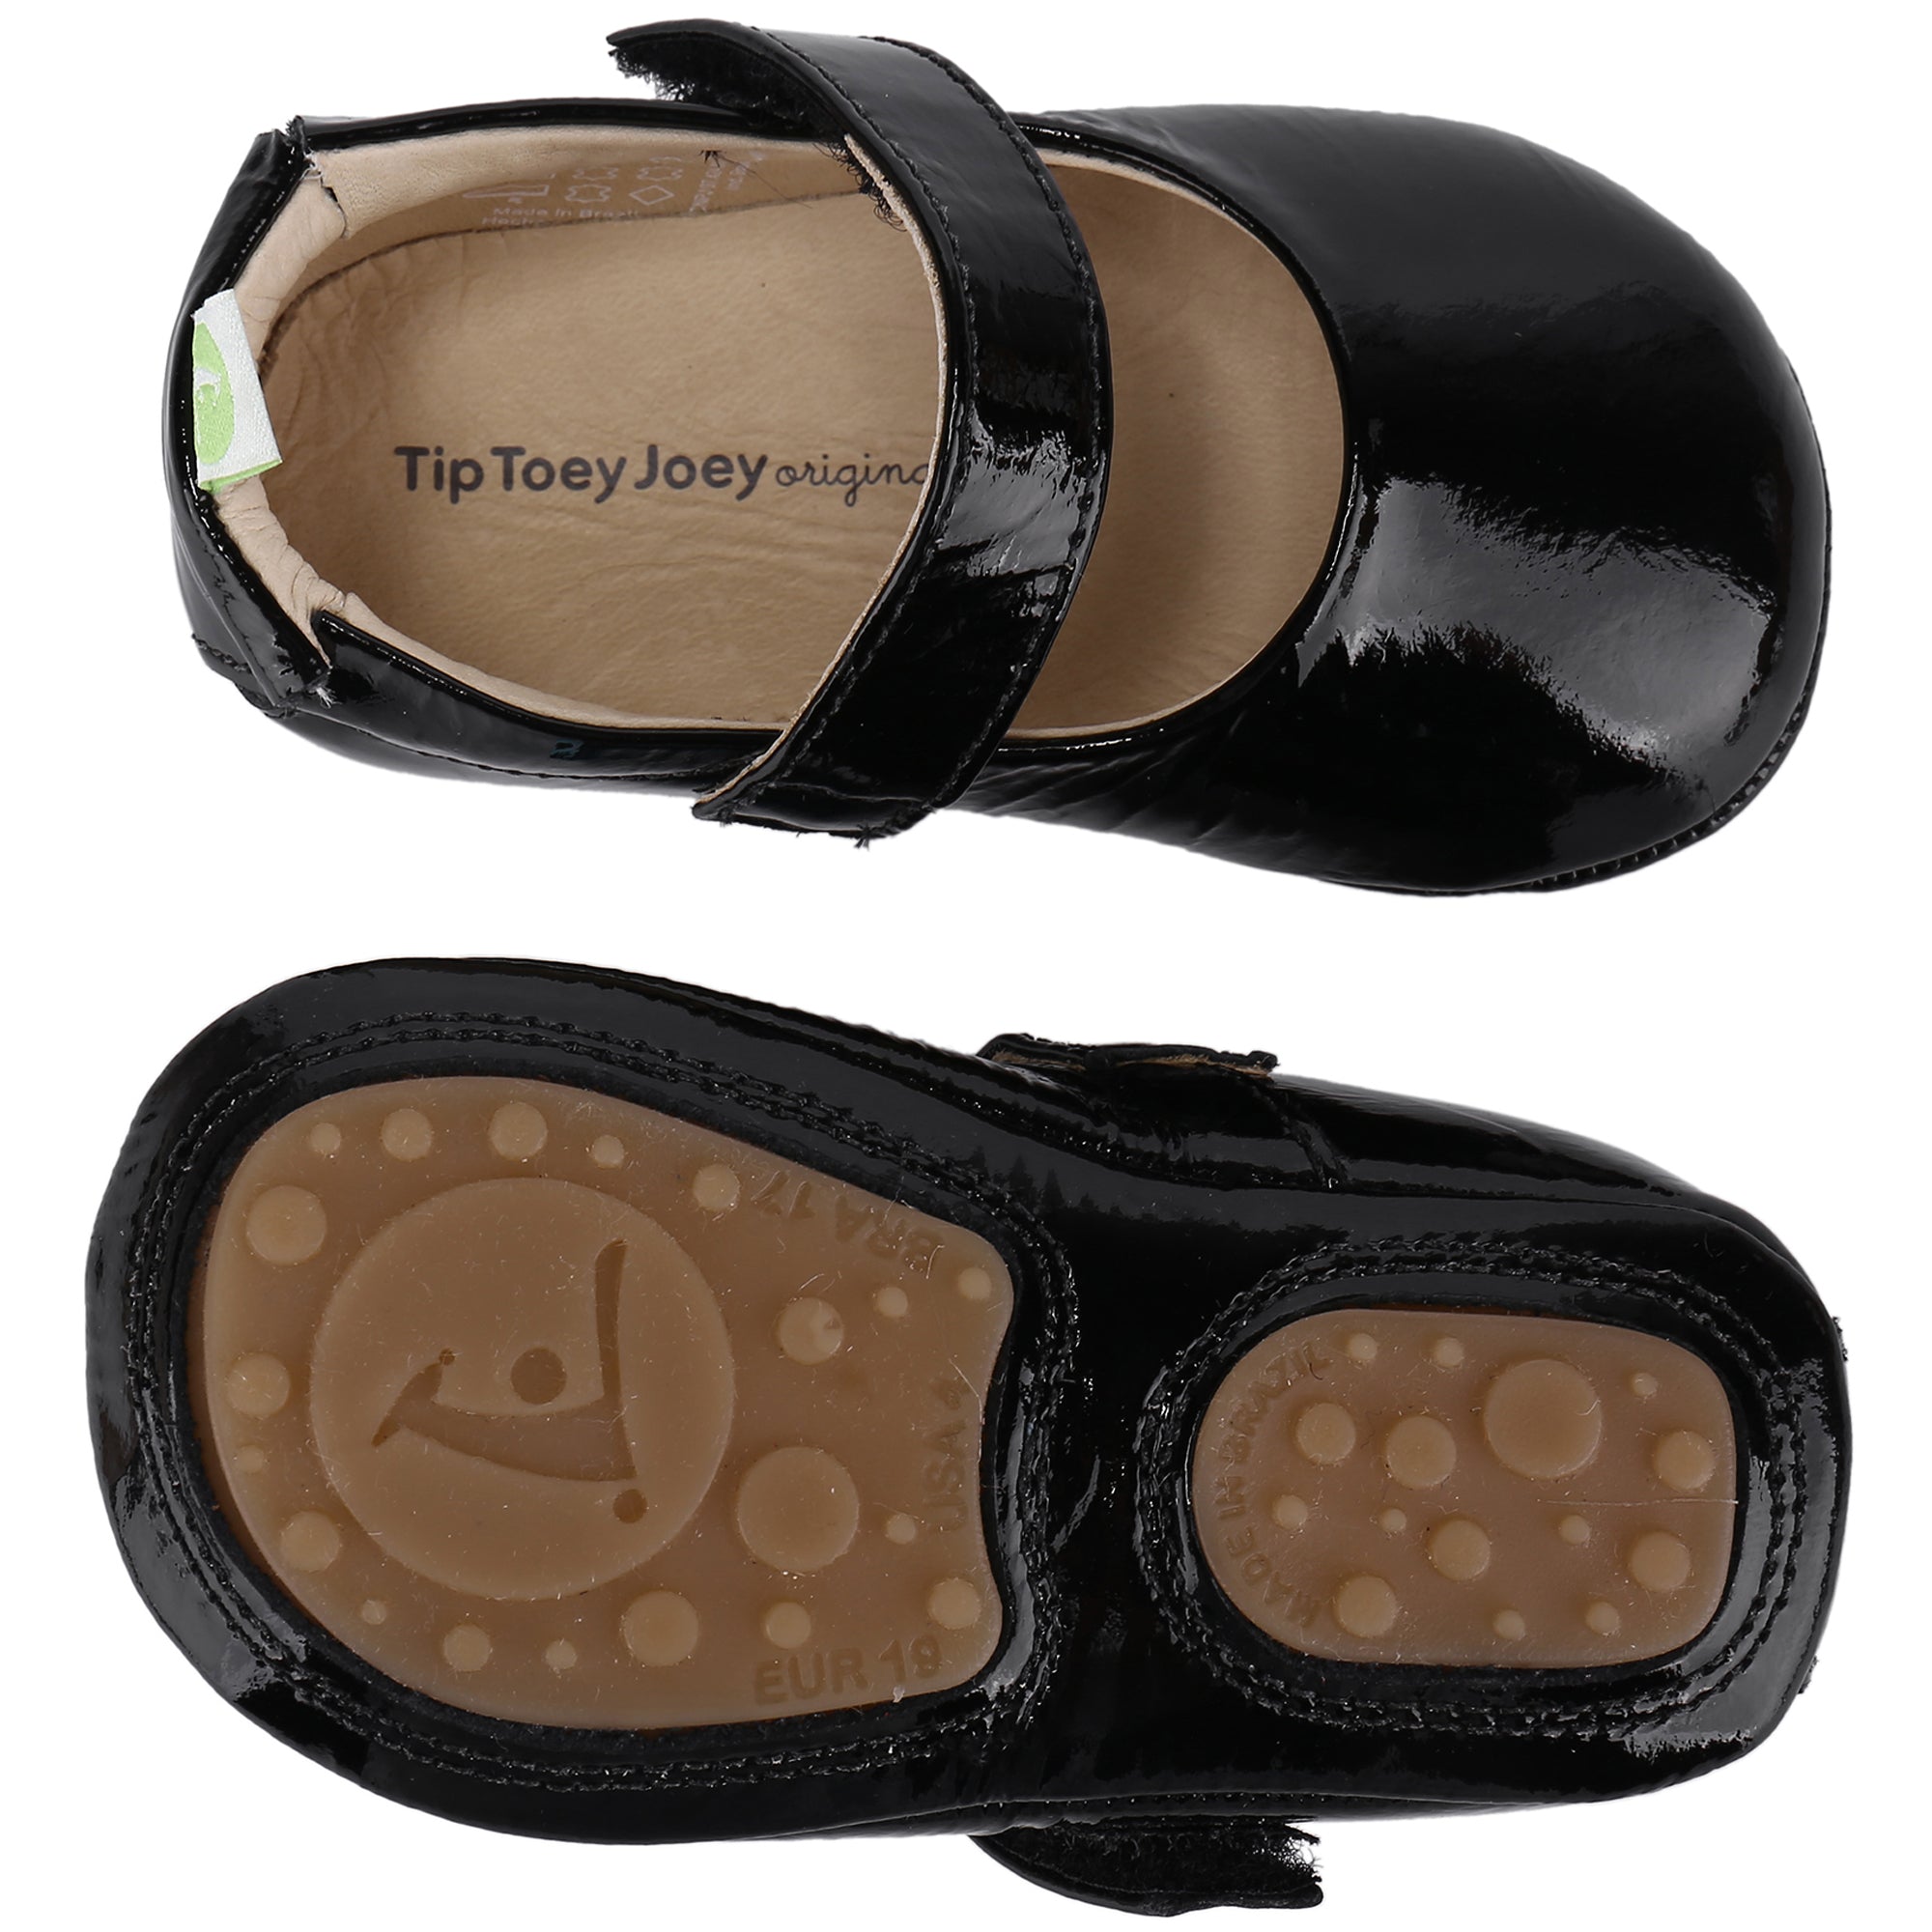 Baby Black Leather Shoes